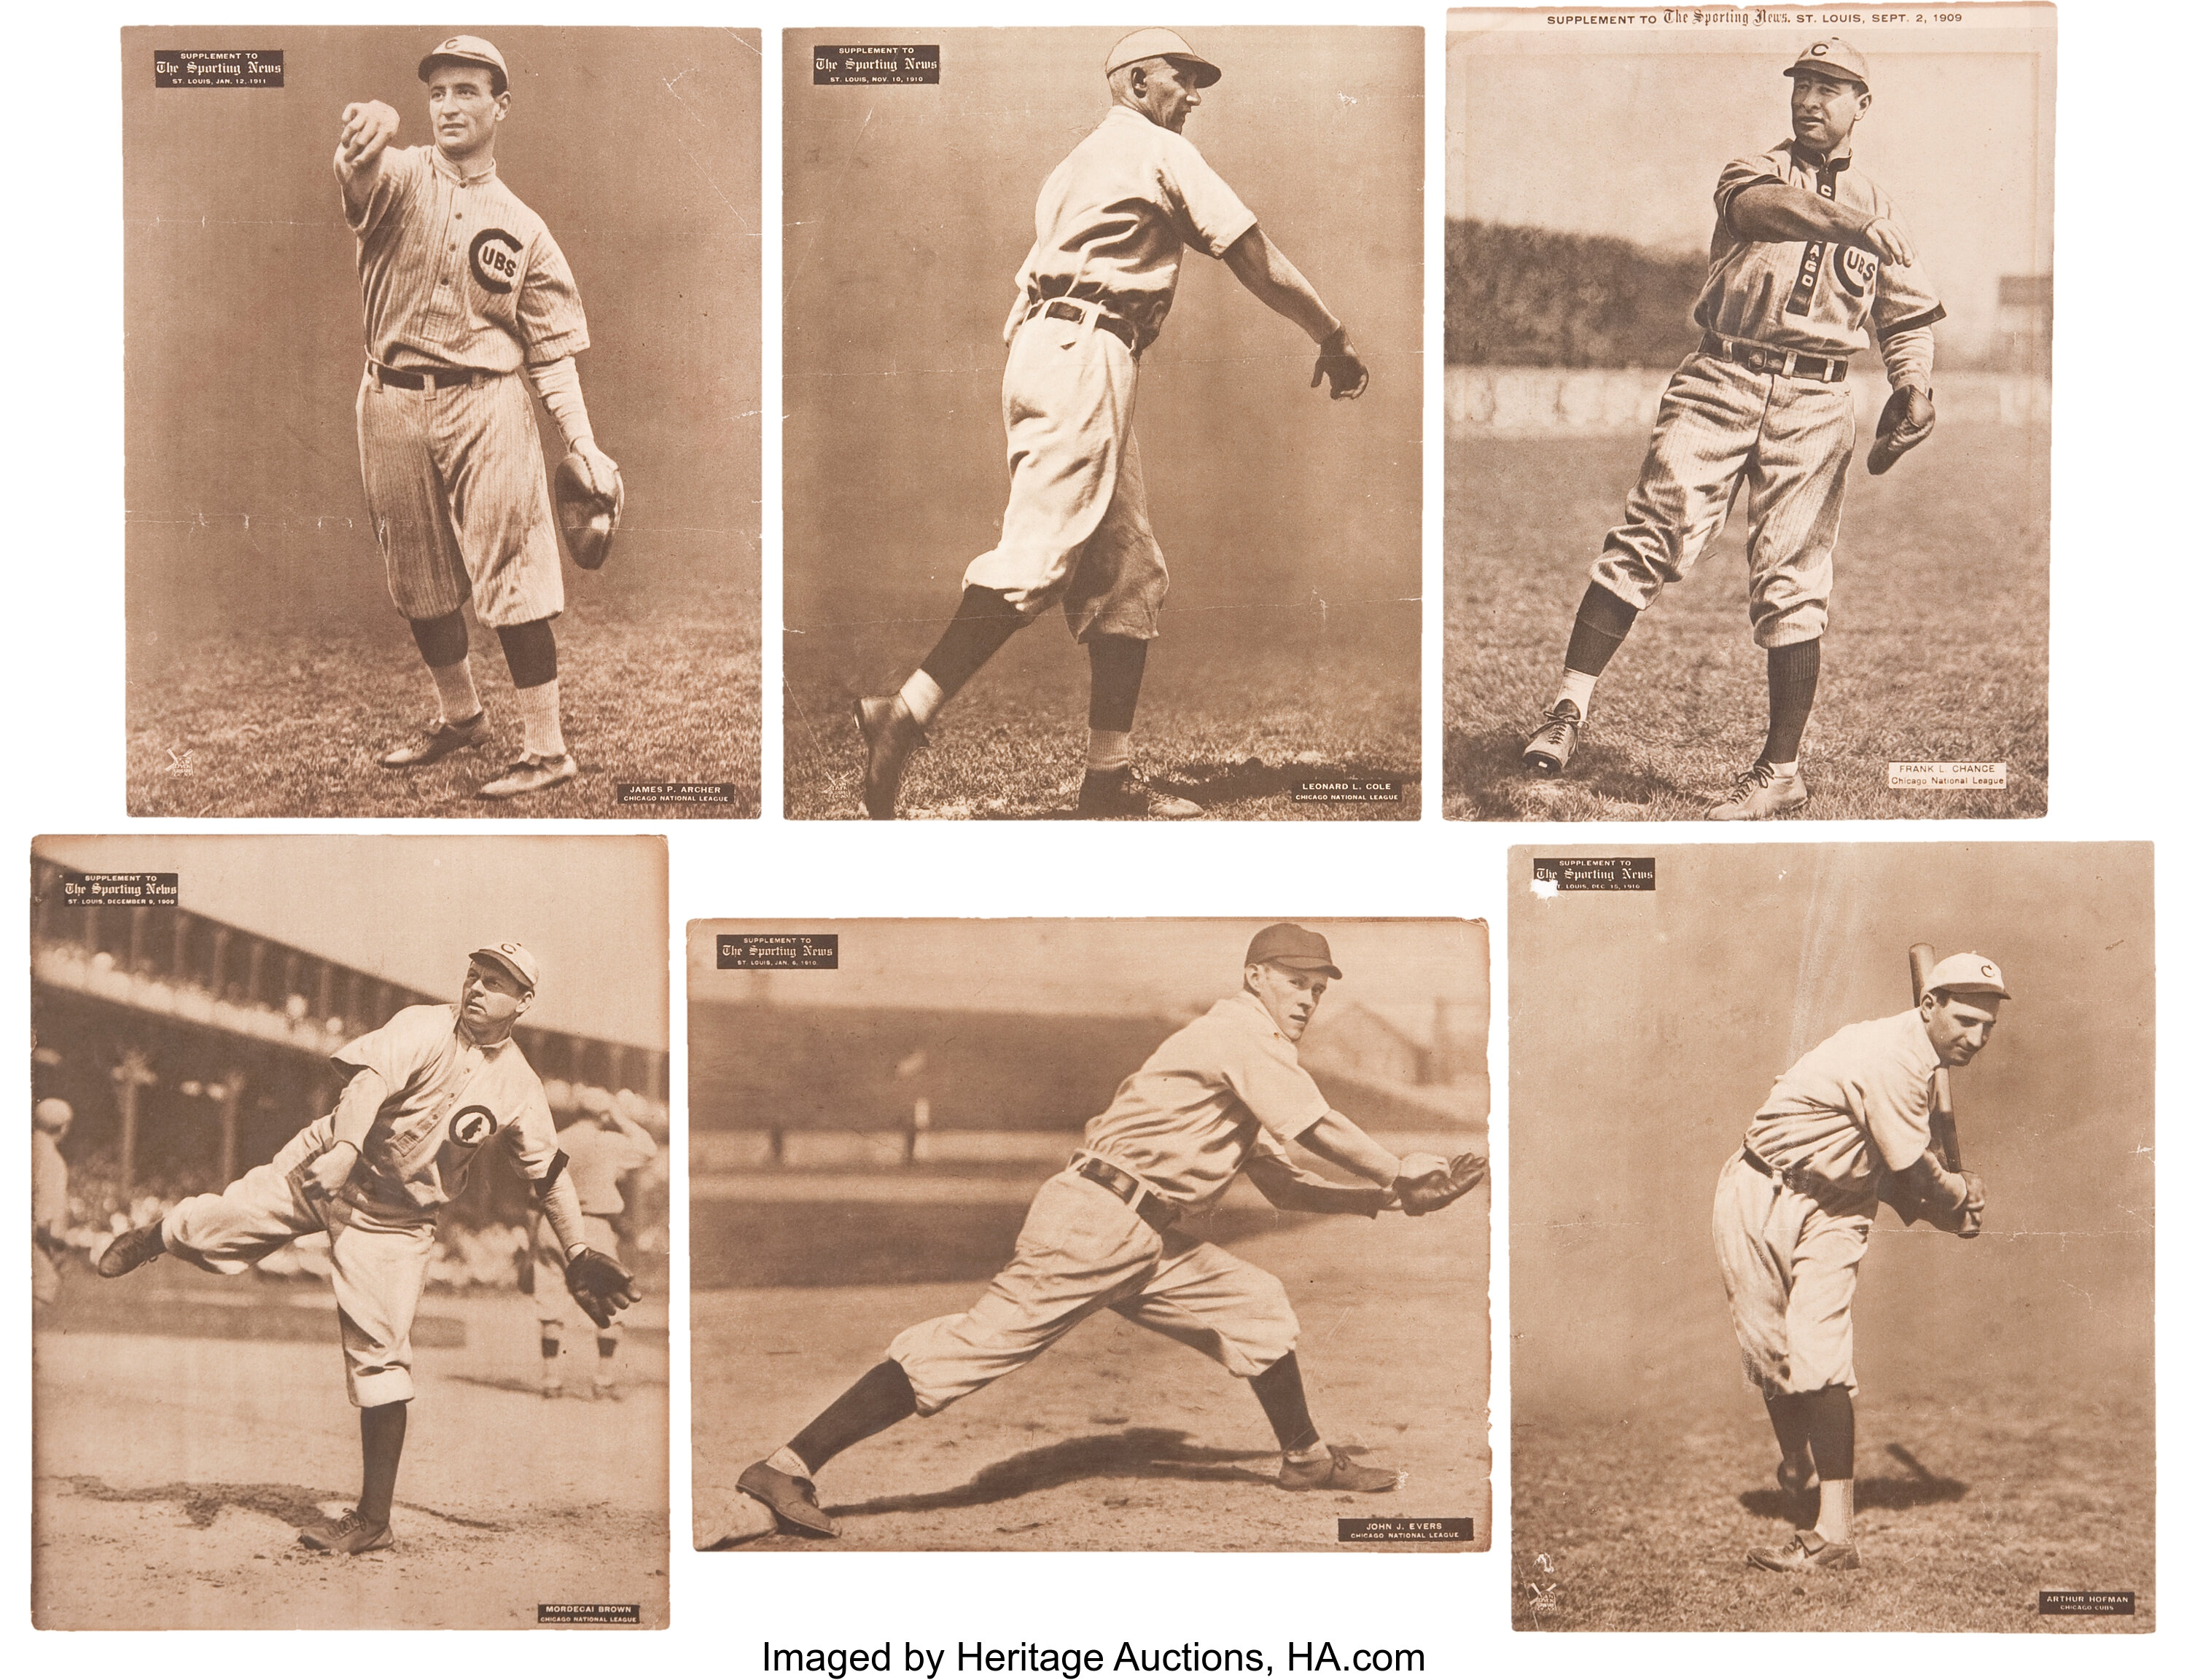 Chicago Cubs 1912 throwback uniforms.